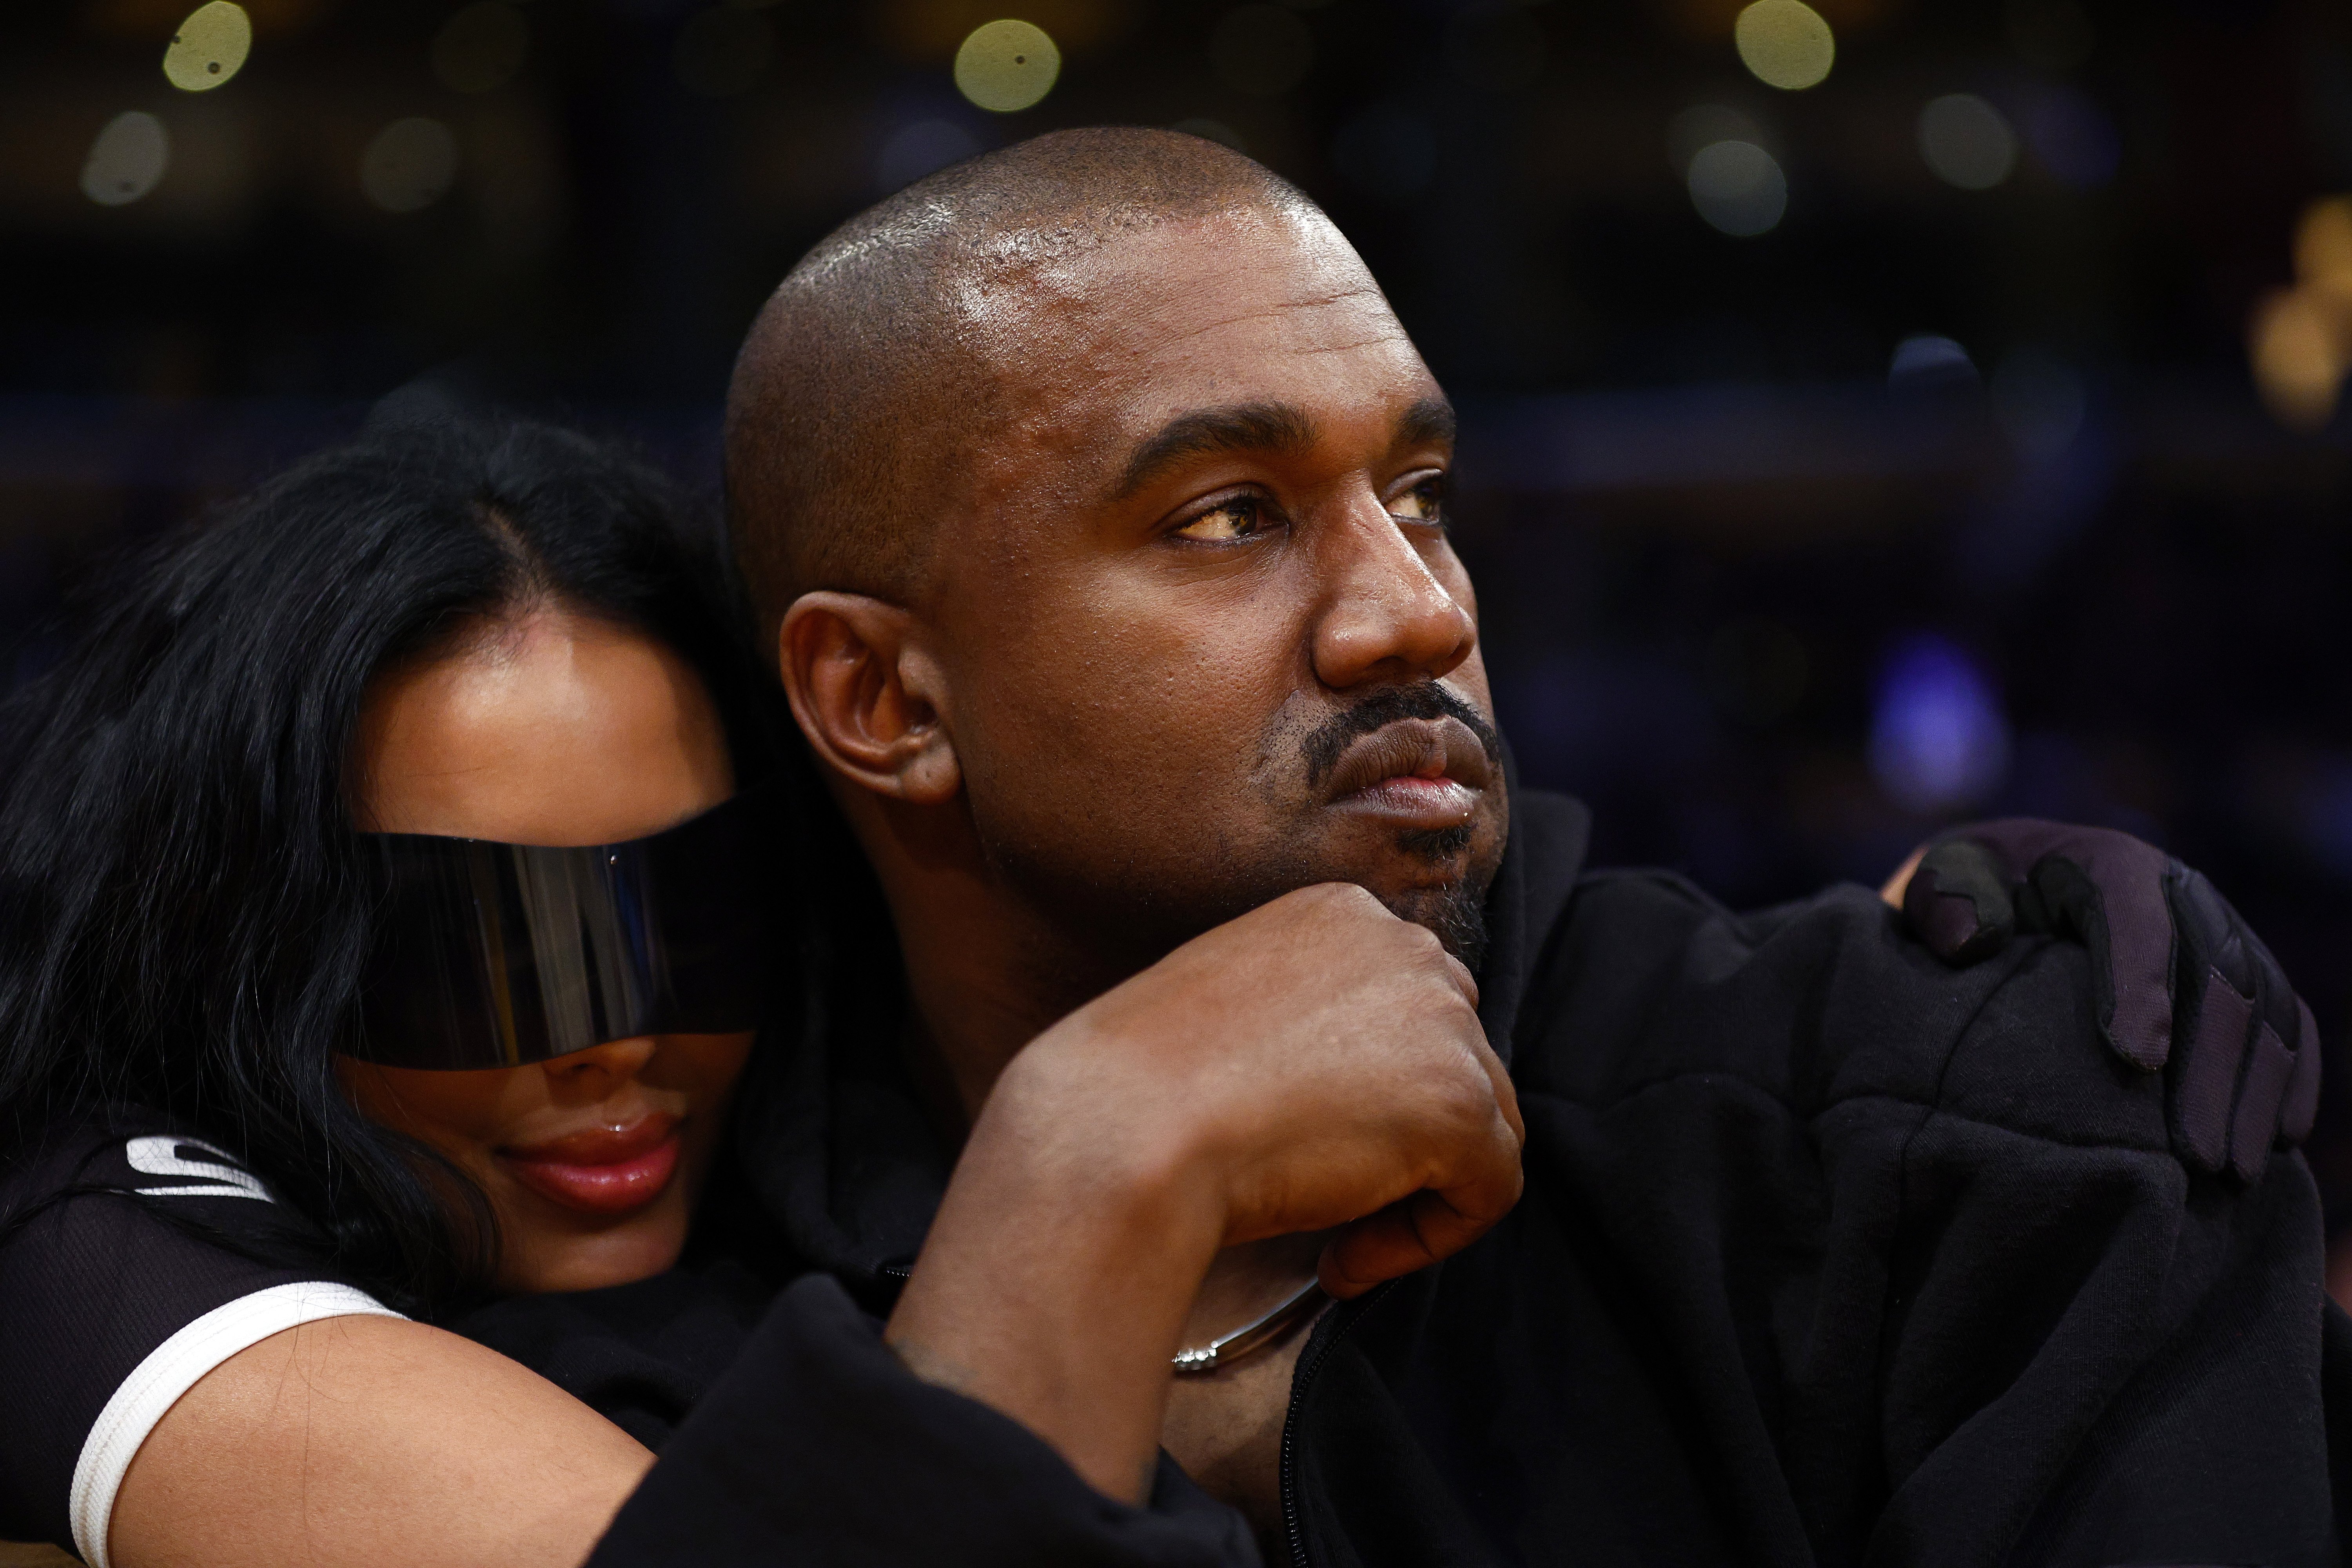 Kanye West and Chaney Jones at a game between the Washington Wizards and the Los Angeles Lakers on March 11, 2022 in Los Angeles.  | Source: Getty Images